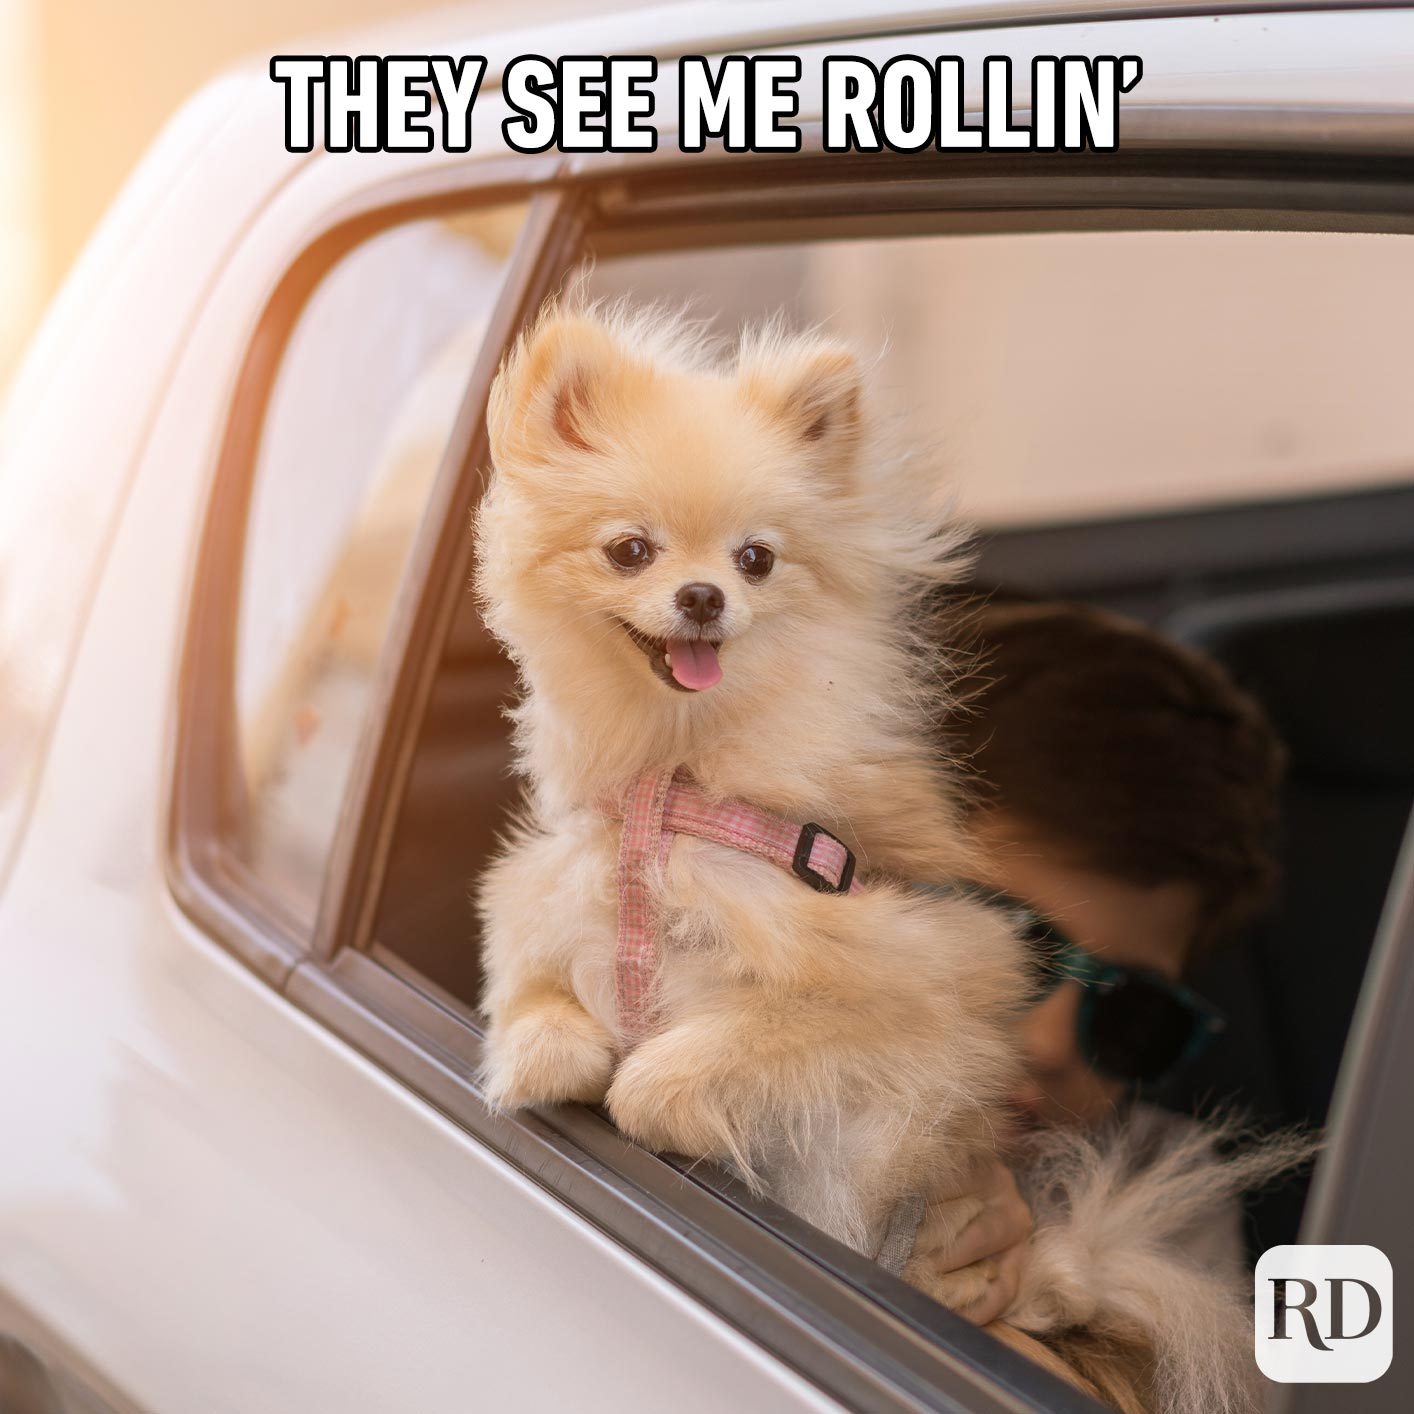 Long-haired chihuhua sticking out of the window of a car majestically. Meme text: They see me rollin'